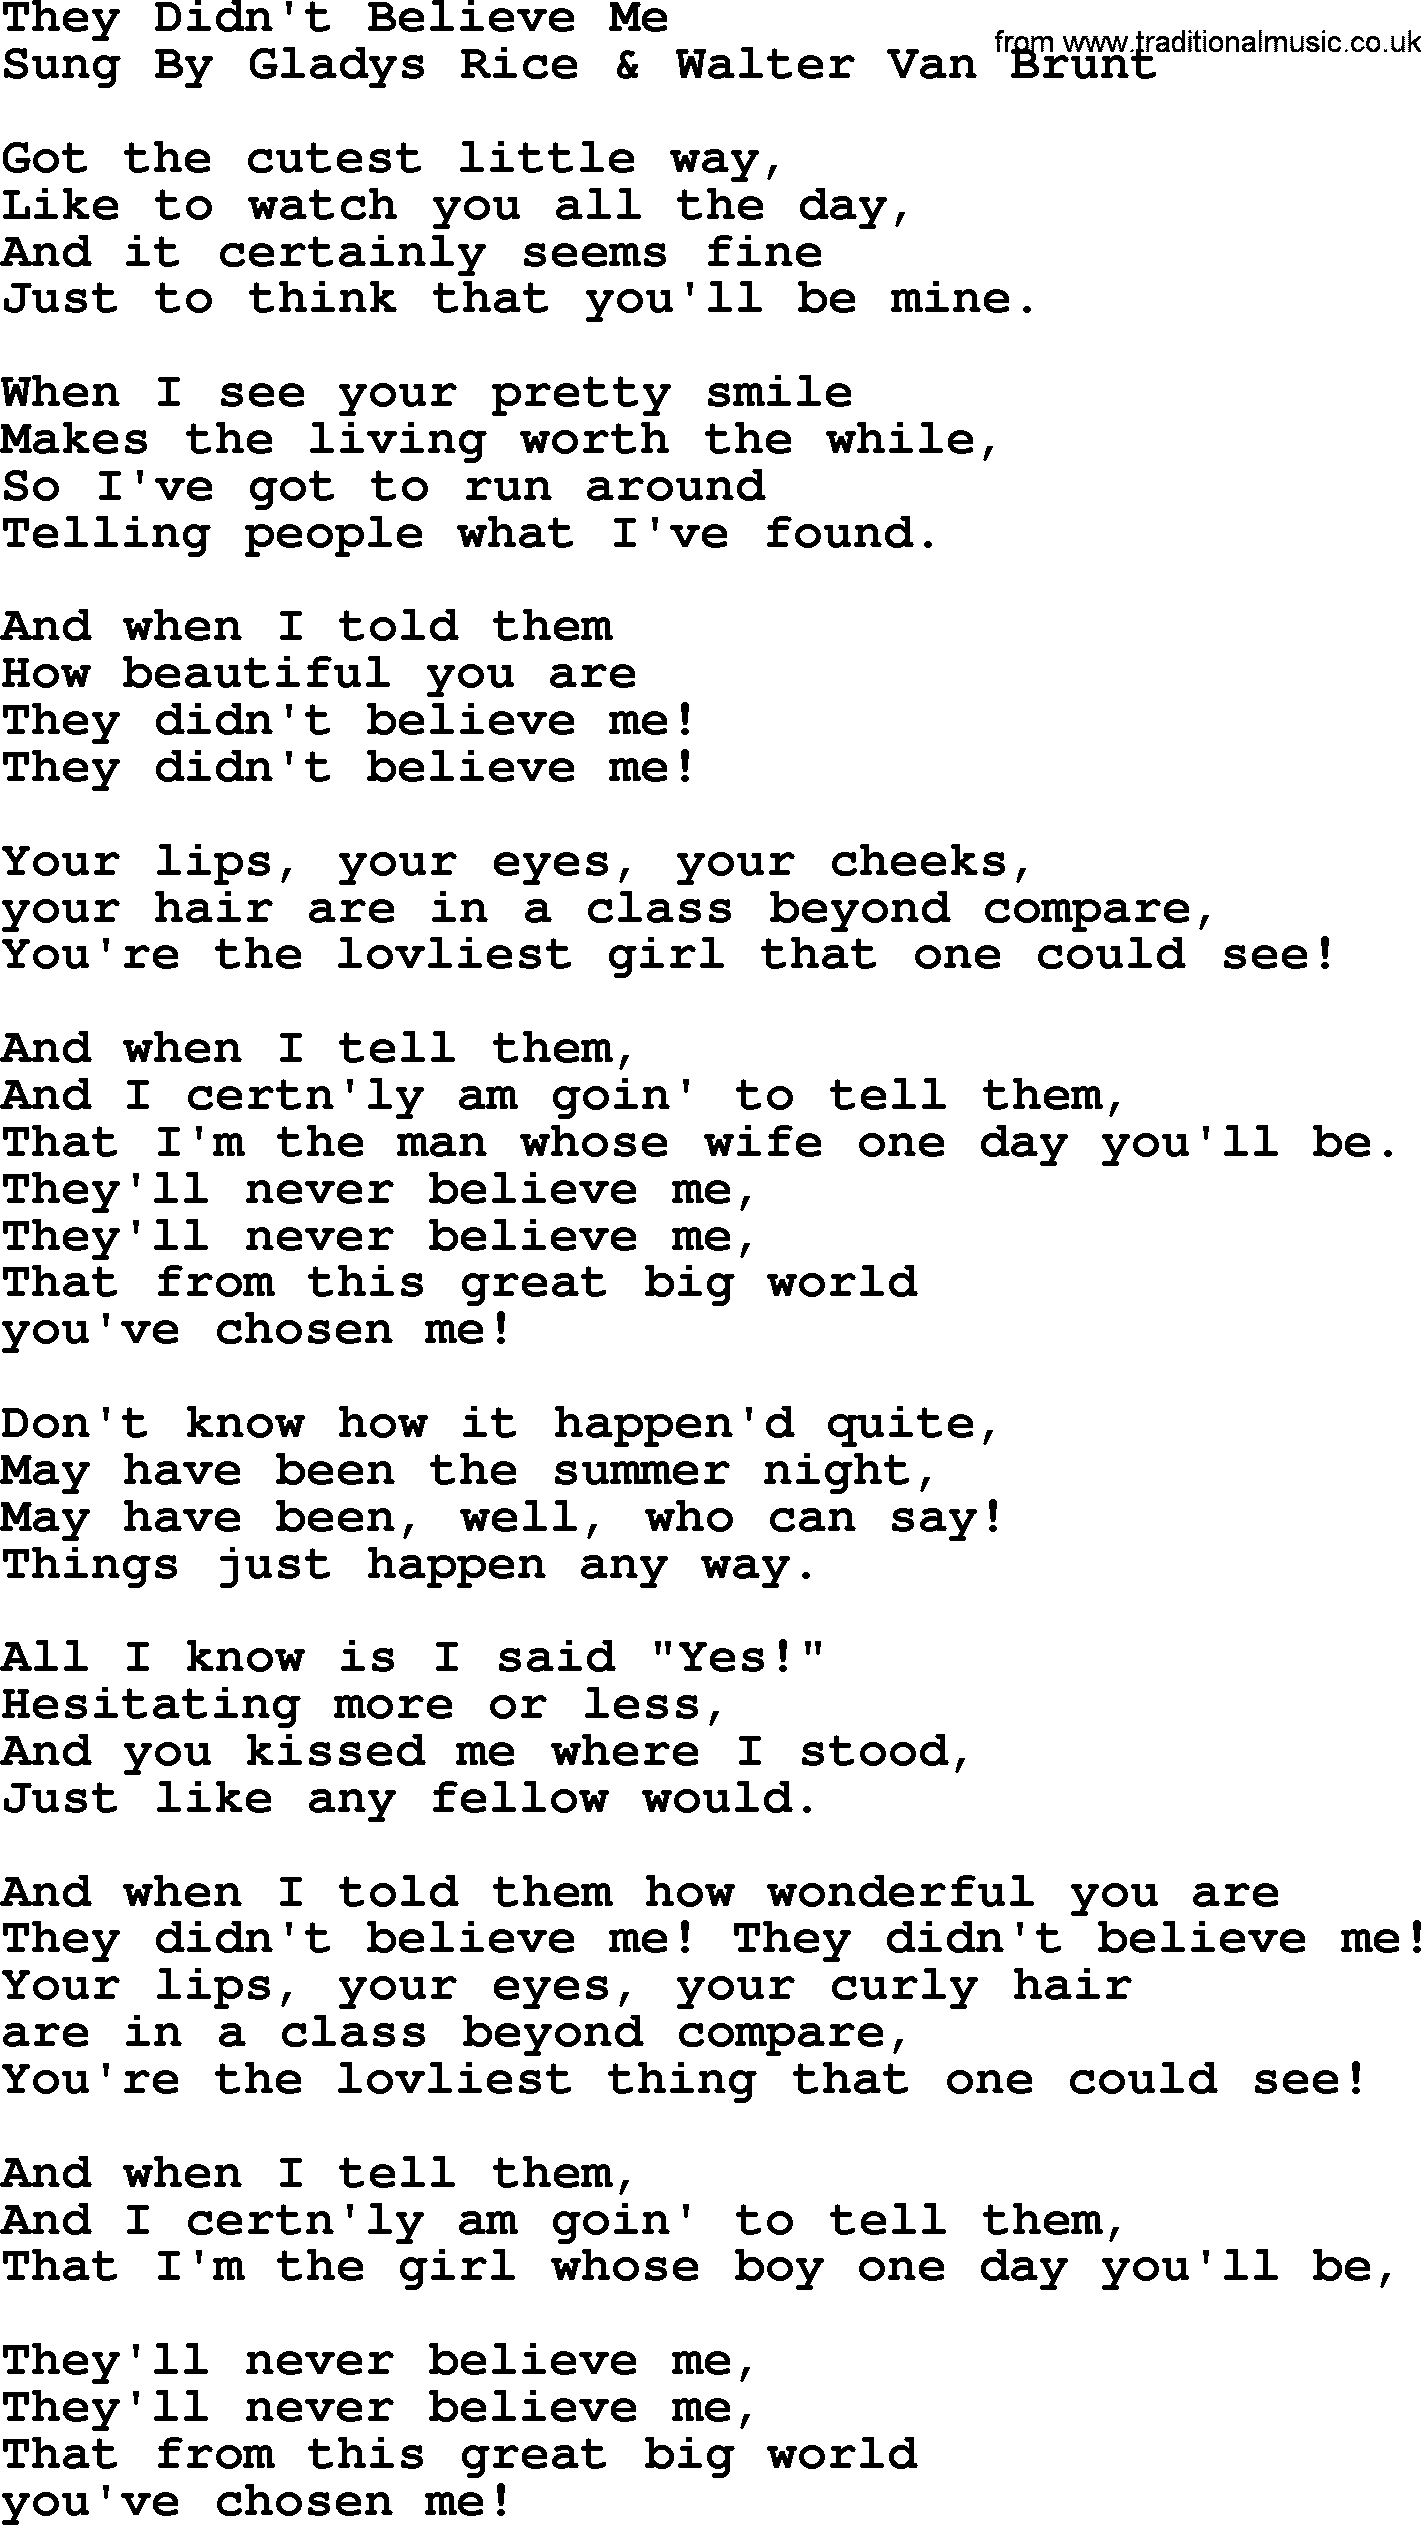 World War(WW1) One Song: They Didn't Believe Me, lyrics and PDF